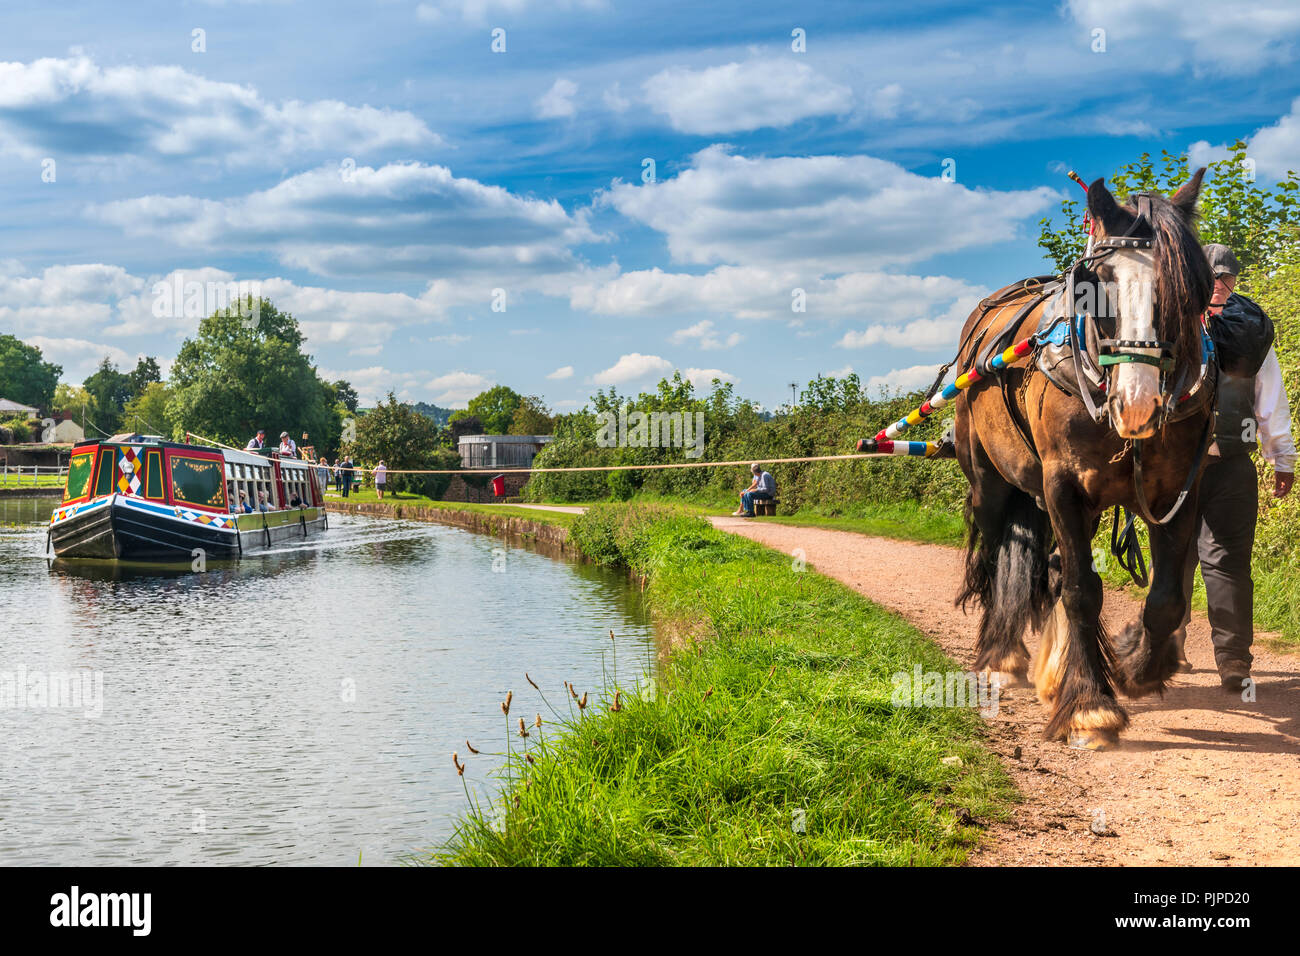 'Tivertonian', the last horse-drawn barge in the West Country, sets off for another serene trip down the Grand Western Canal near Tiverton in Devon. Stock Photo